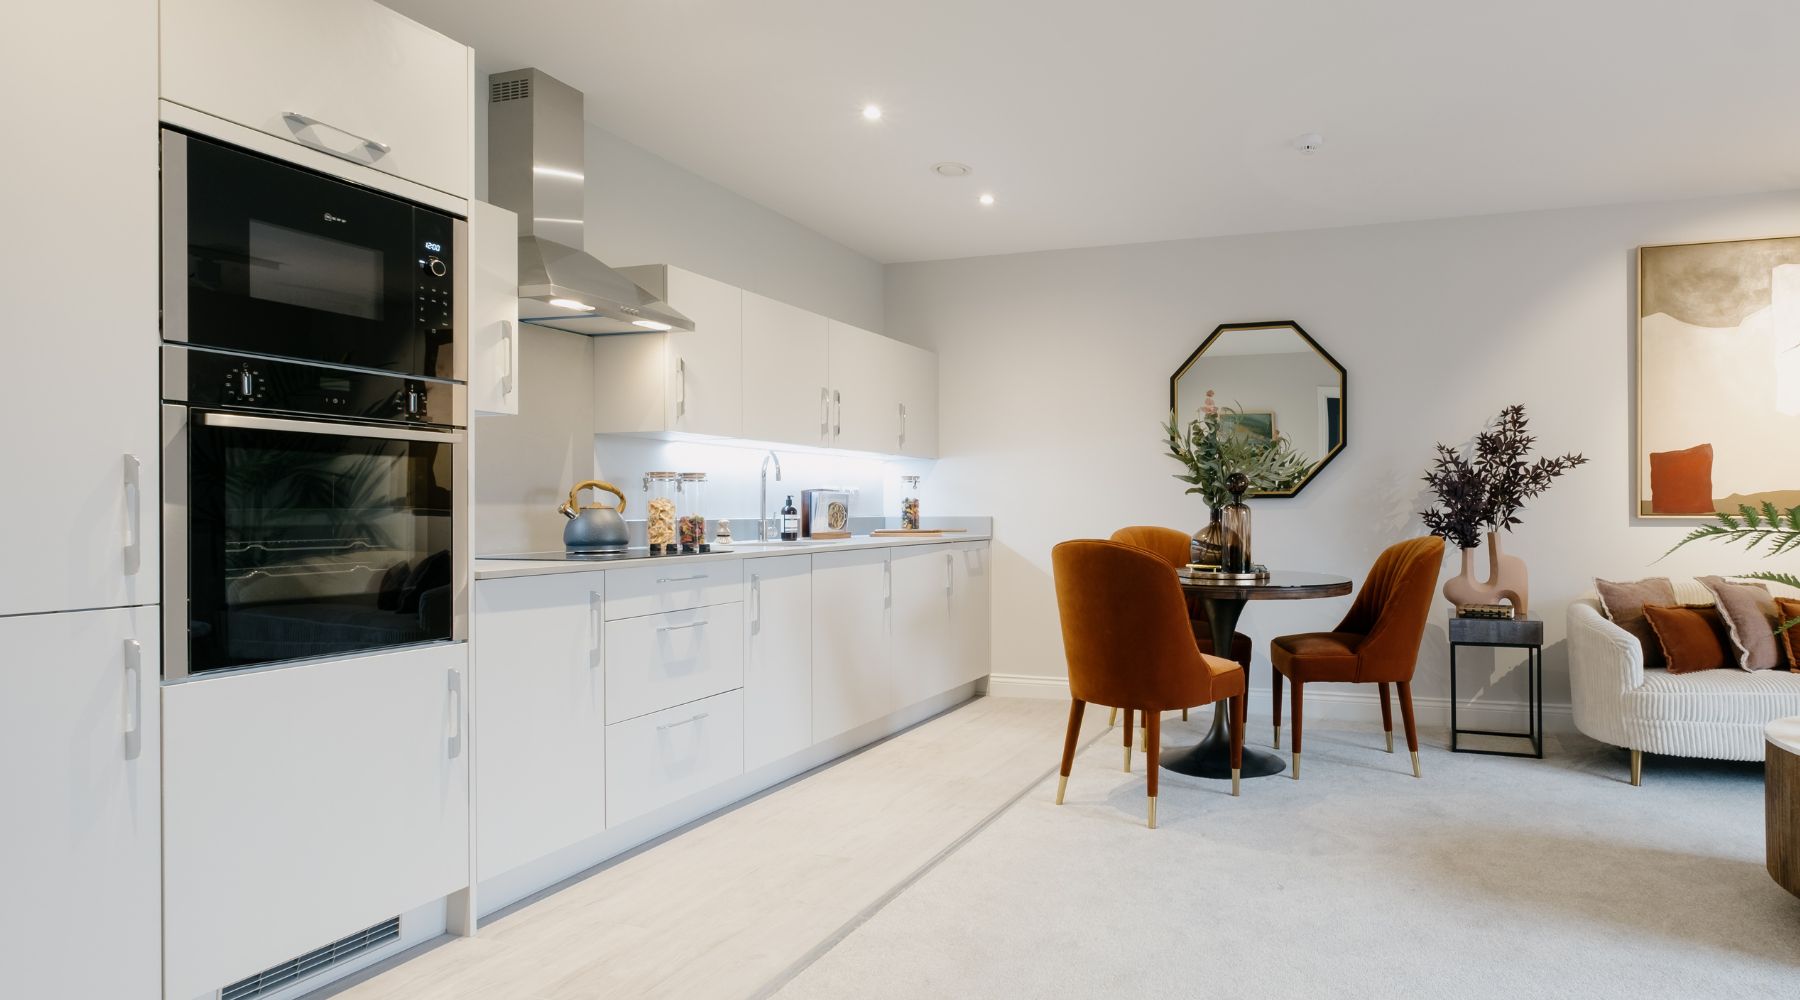 Trinity Lodge future-proofed, accessible apartment, open plan kitchen/dining/living area featuring Side and Hide oven, ceramic hob, integrated fridge/freezer and plentiful easy-access storage 